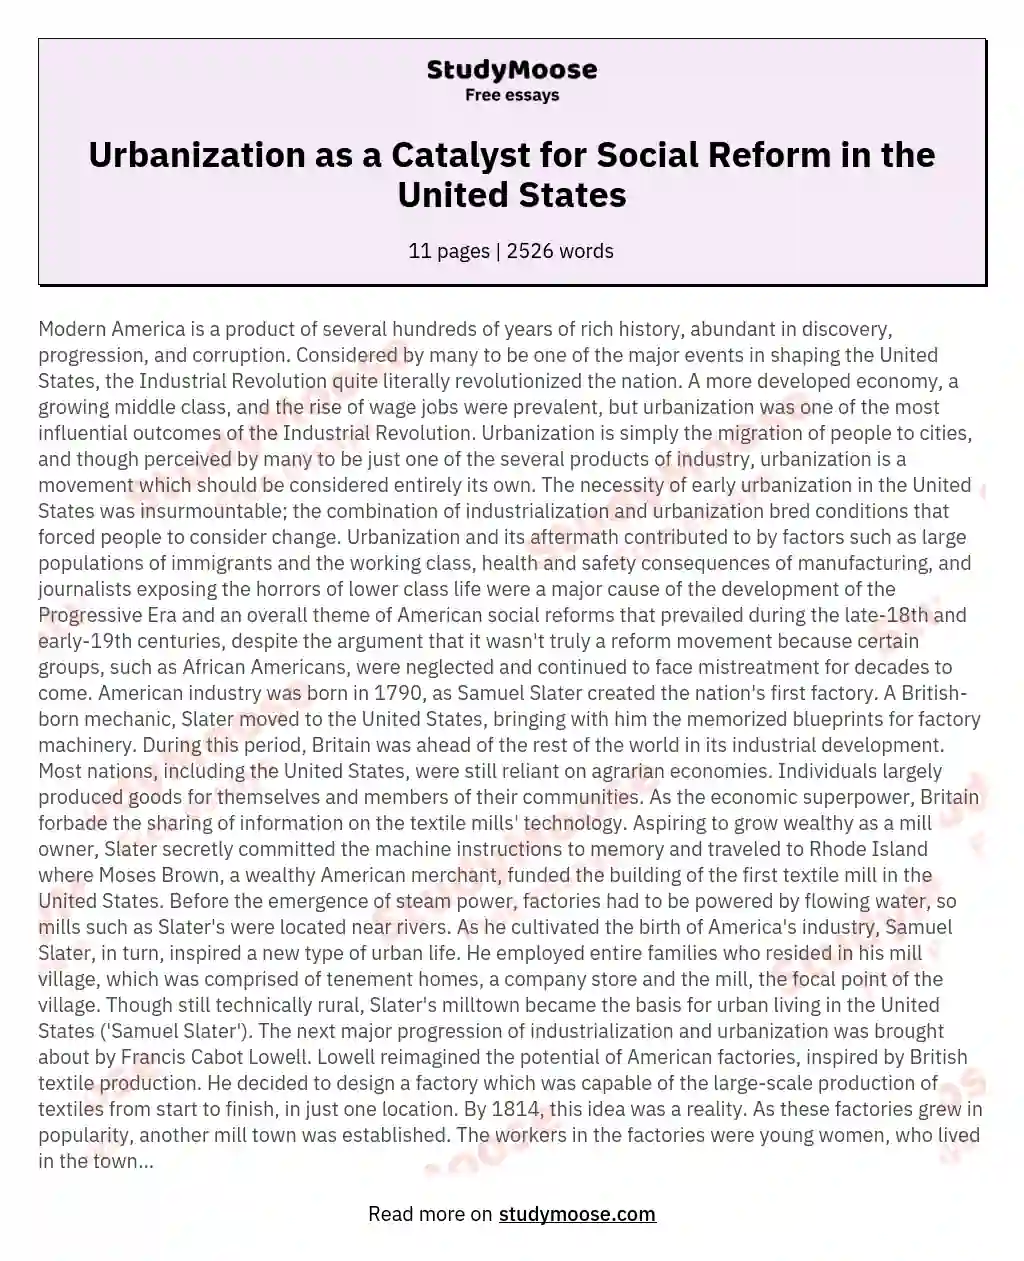 Urbanization as a Catalyst for Social Reform in the United States essay